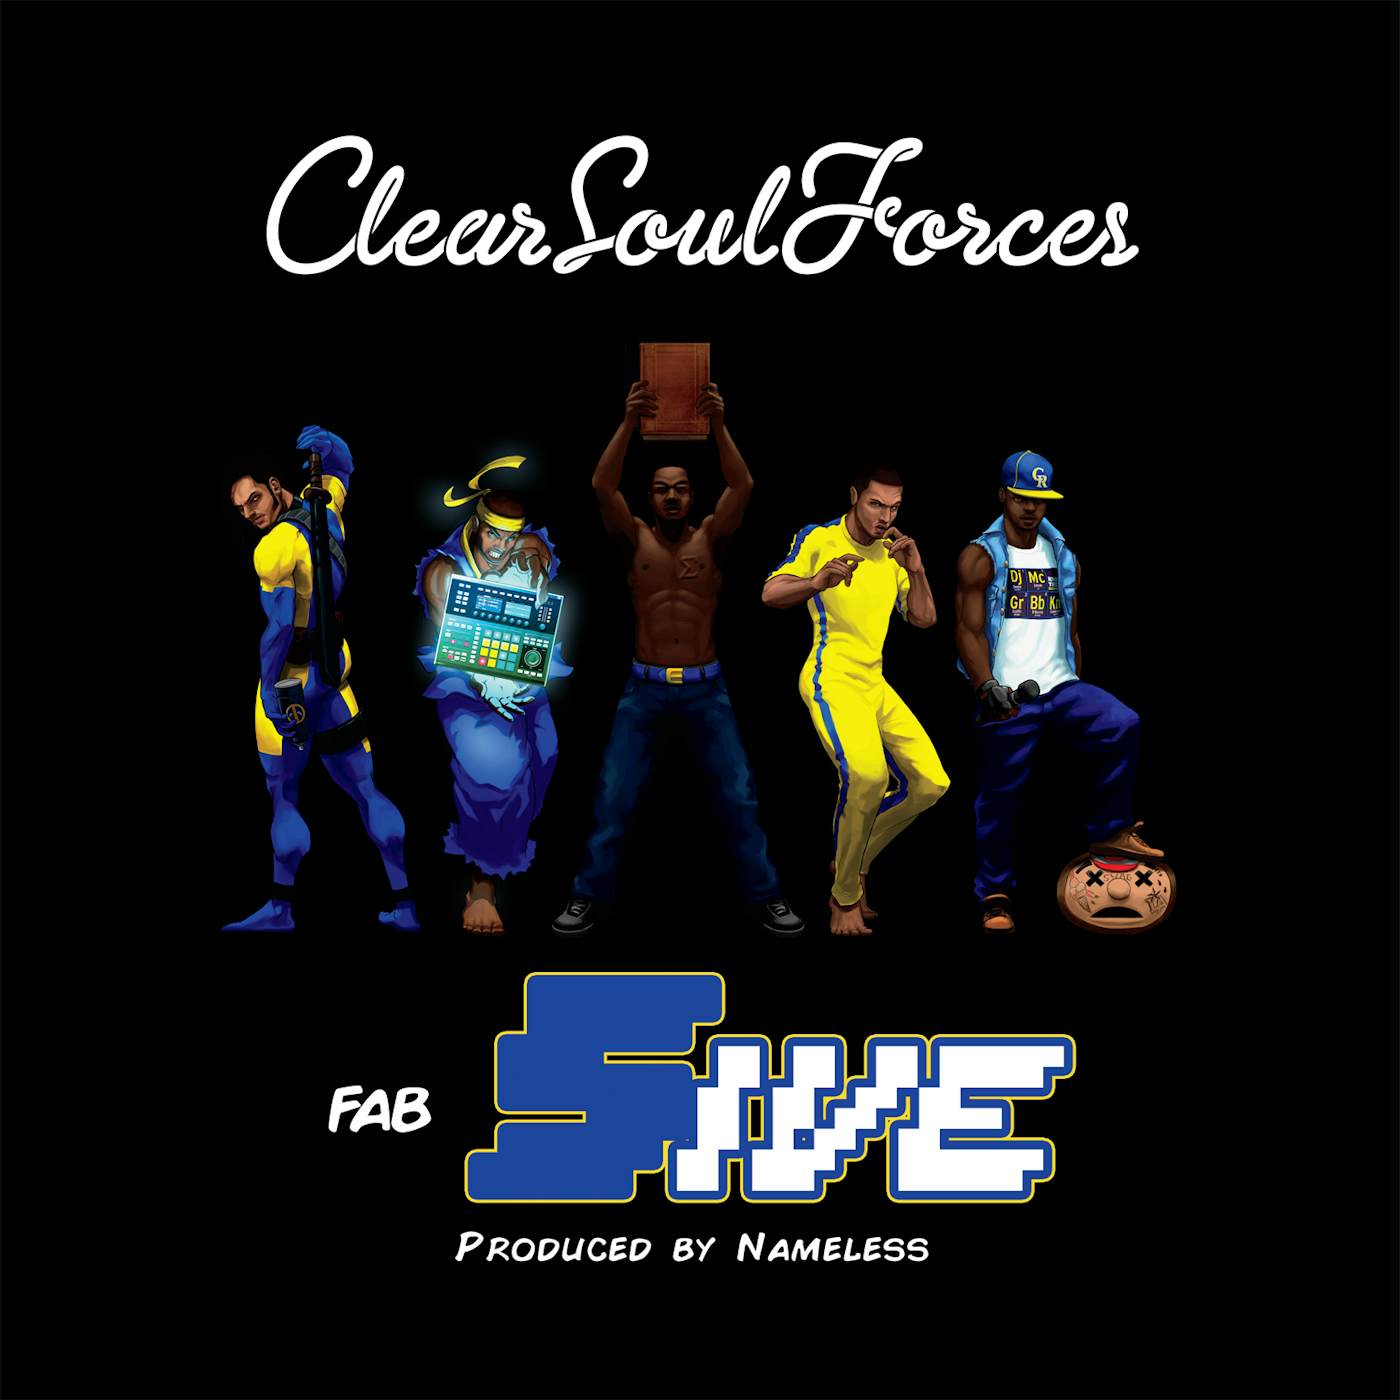 Clear Soul Forces FAB FIVE CD